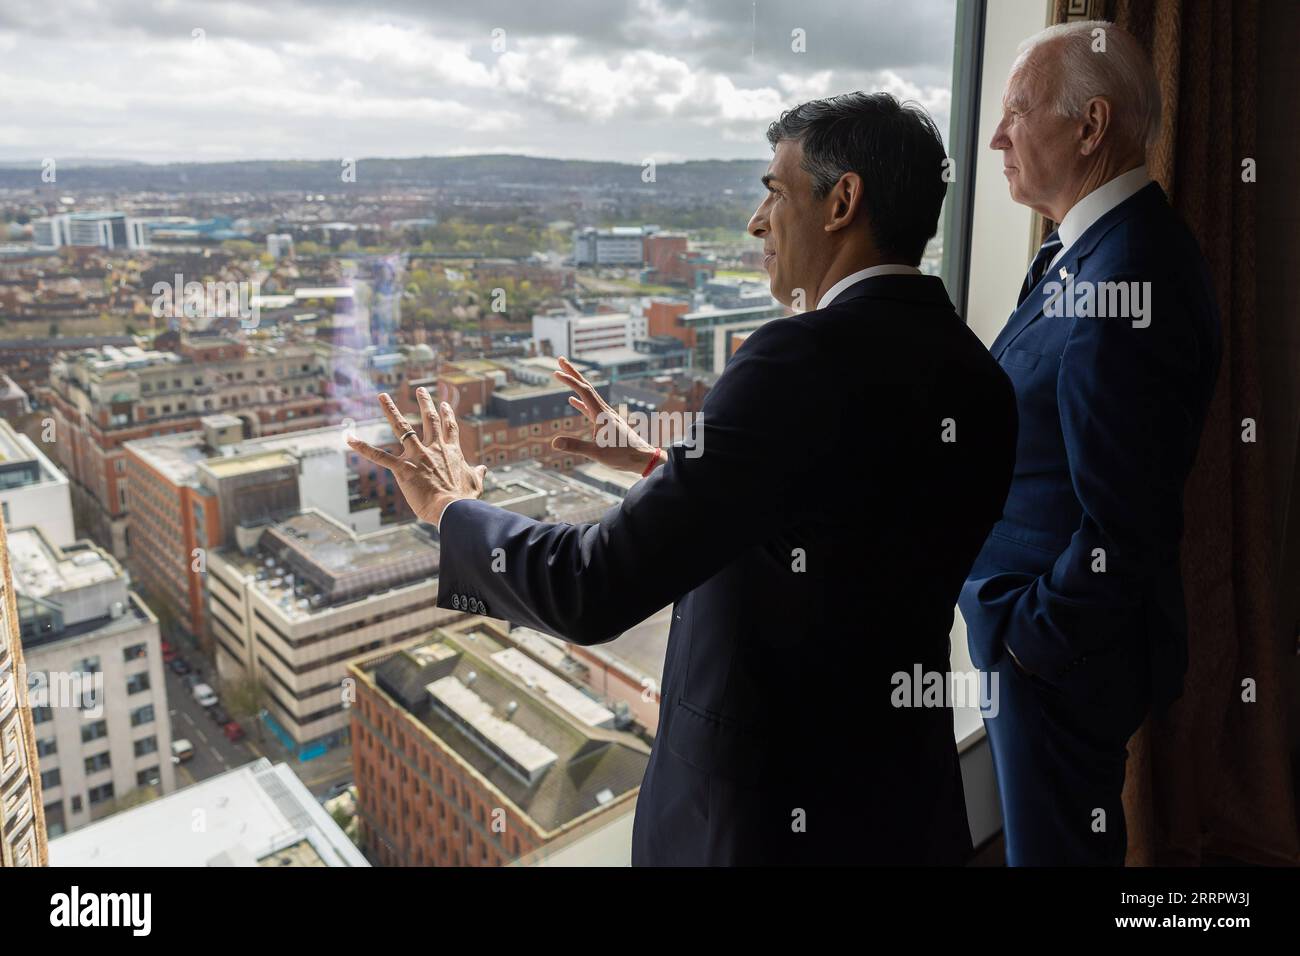 230412 -- BELFAST, April 12, 2023 -- British Prime Minister Rishi Sunak L meets with U.S. President Joe Biden in Belfast, Northern Ireland, the United Kingdom, on April 12, 2023. During his visit to Belfast on Wednesday, U.S. President Joe Biden called for the restoration of the power-sharing government in Northern Ireland. However, analysts do not expect his plea to lead to significant change. /Handout via Xinhua UK-NORTHERN IRELAND-BELFAST-U.S.-PRESIDENT-VISIT SimonxWalker/Nox10xDowningxStreet PUBLICATIONxNOTxINxCHN Stock Photo